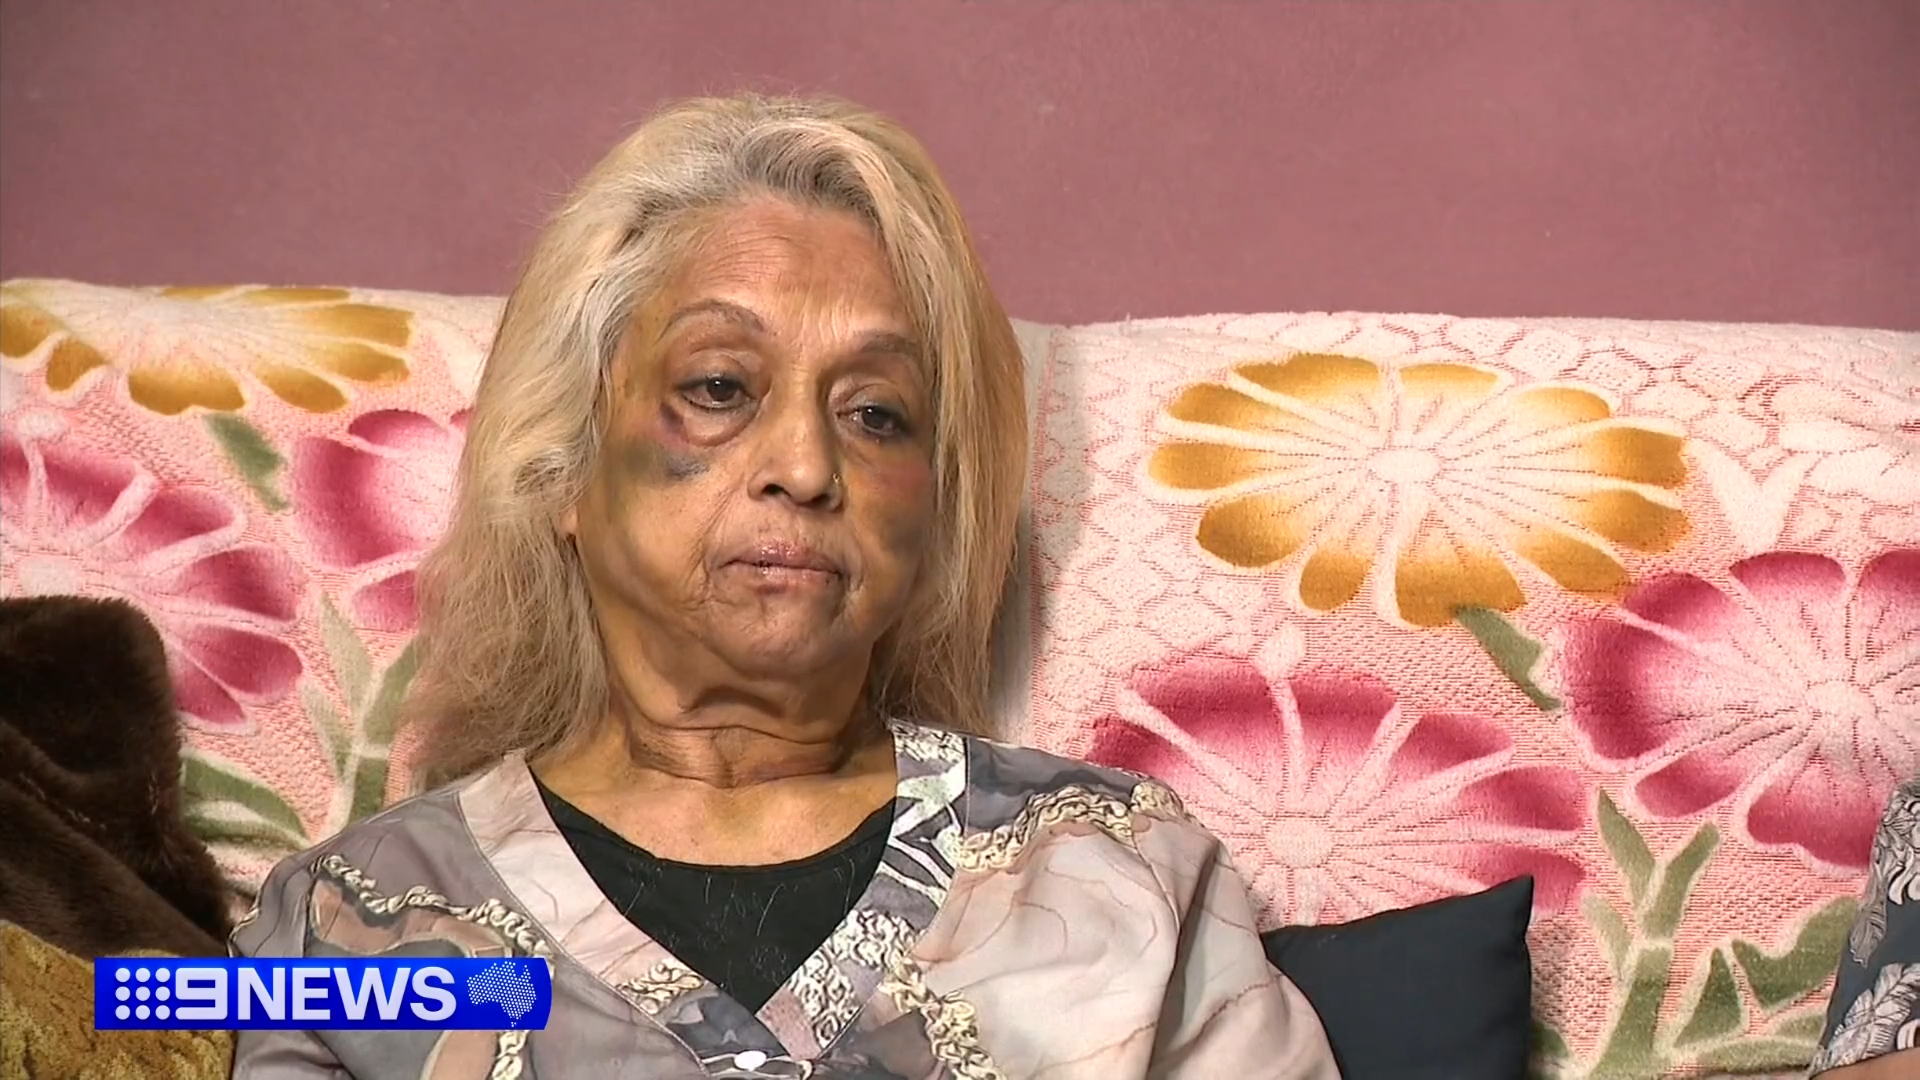 Ninette Simons is still bruised but is bravely sharing her story and pleading for help in finding her attackers, with the three men behind the incident still at large.